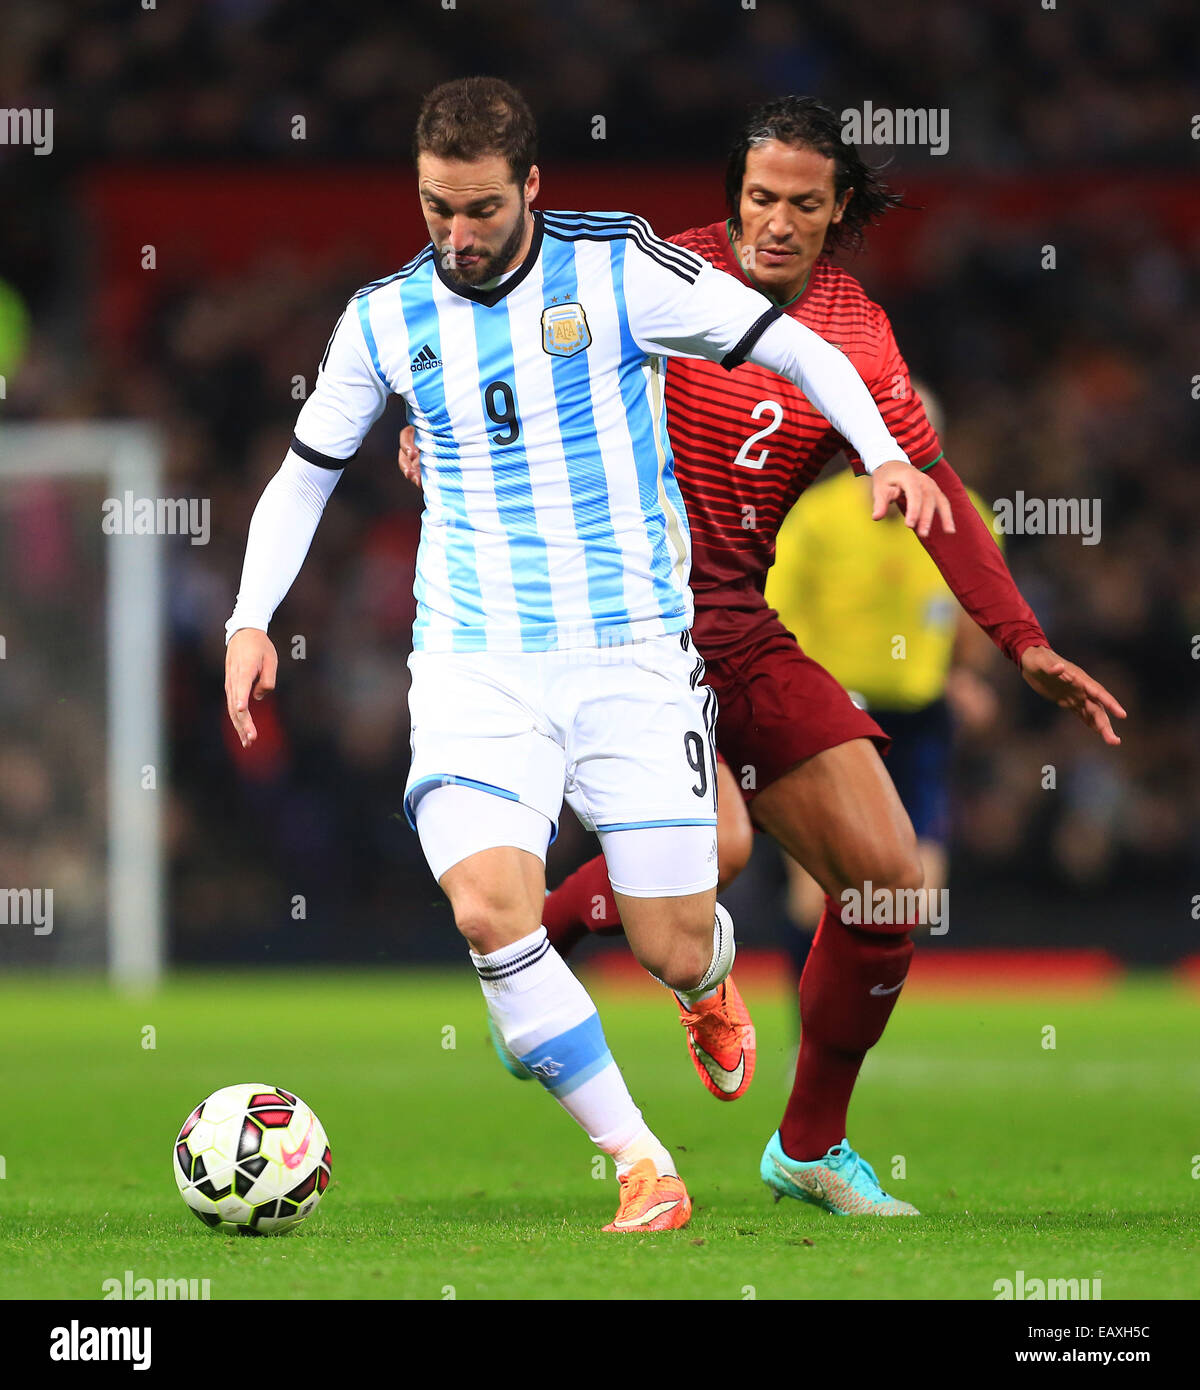 Manchester, UK. 18th Nov, 2014. Bruno Alves of Portugal and Gonzalo Higuain of Argentina - Argentina vs. Portugal - International Friendly - Old Trafford - Manchester - 18/11/2014 Pic Philip Oldham/Sportimage © csm/Alamy Live News Stock Photo